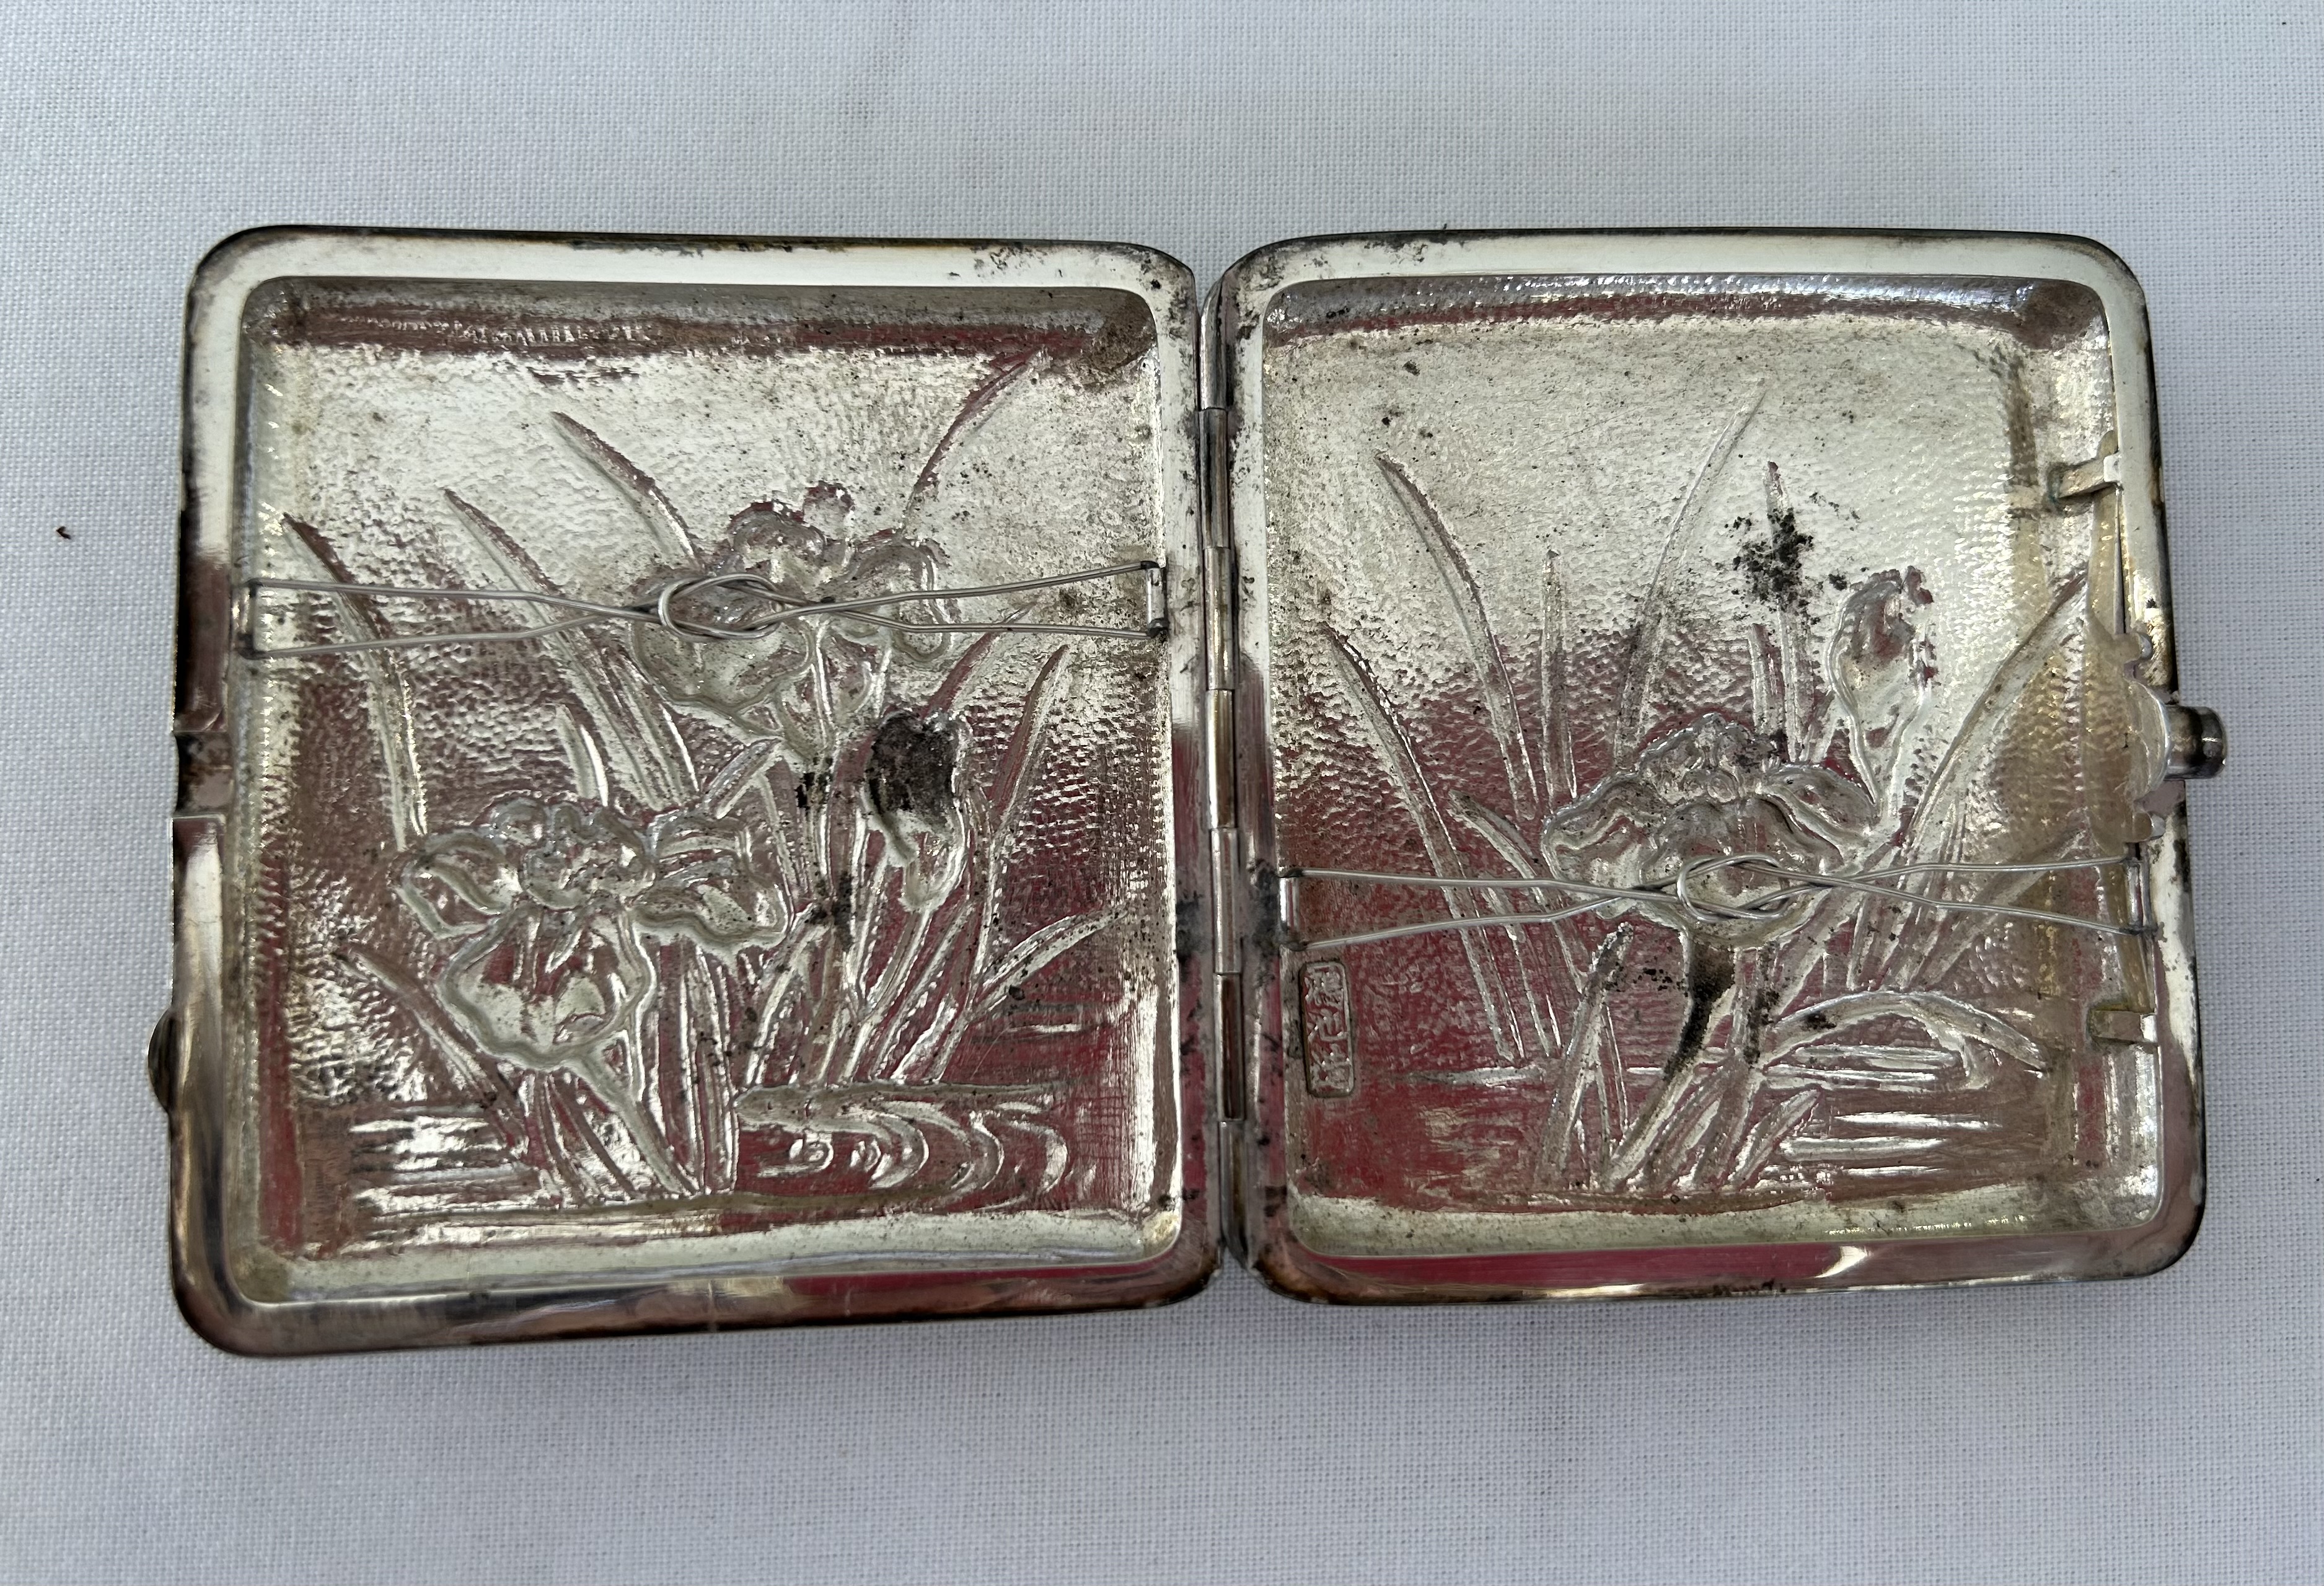 A Japanese Meiji period silver repousse cigarette case - Image 4 of 4